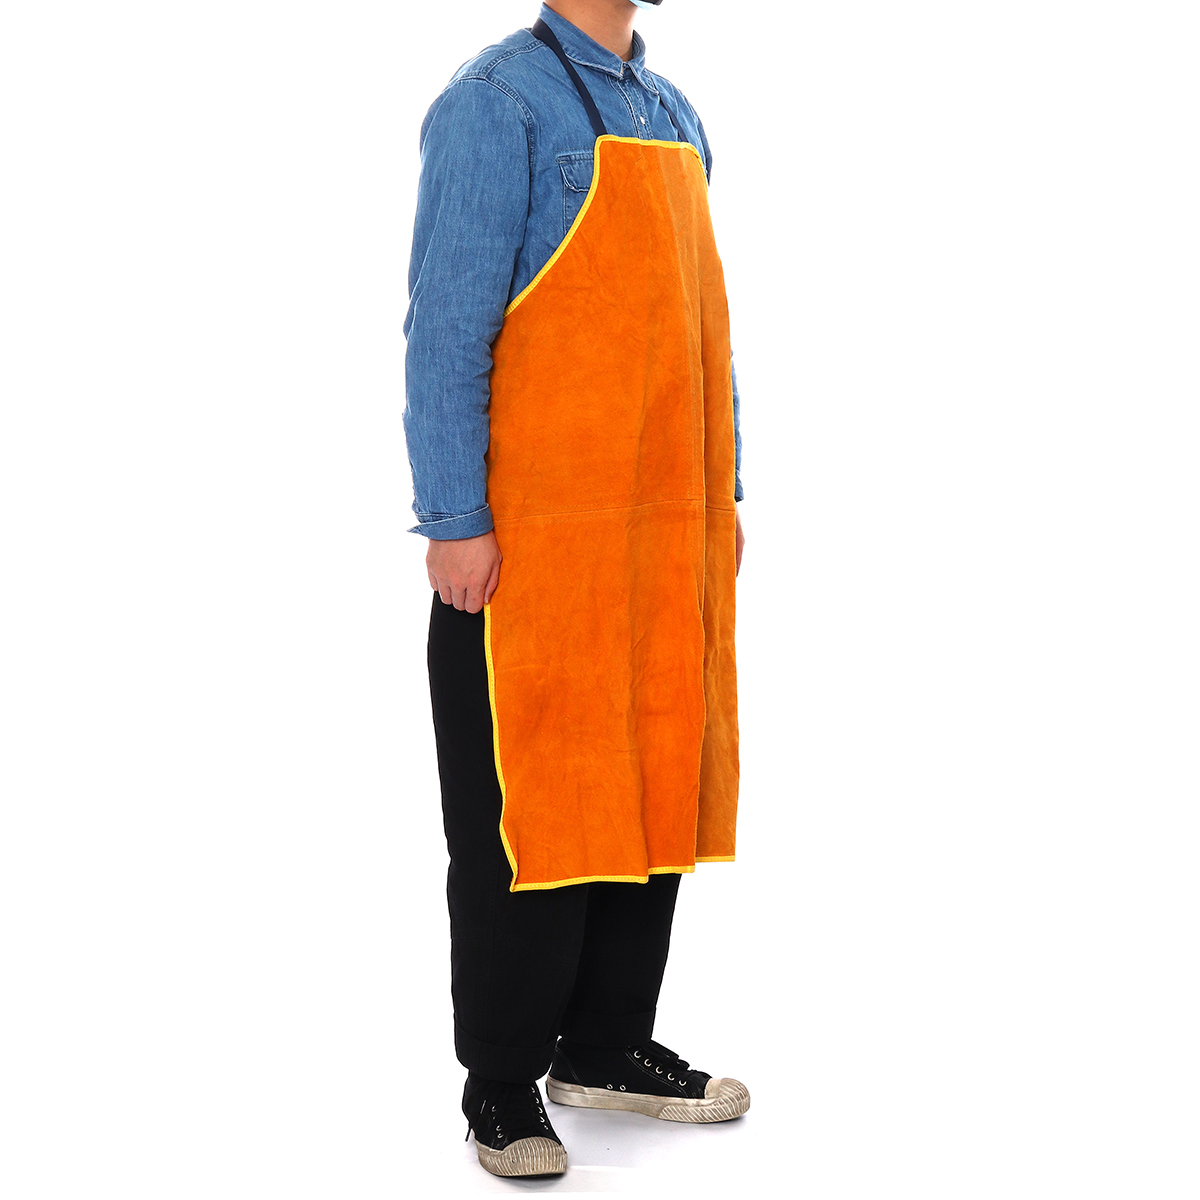 Cowhide-Leather-Welding-Apron-Welder-Protection-Clothe-Mechanic-Protector-Gear-1642713-7